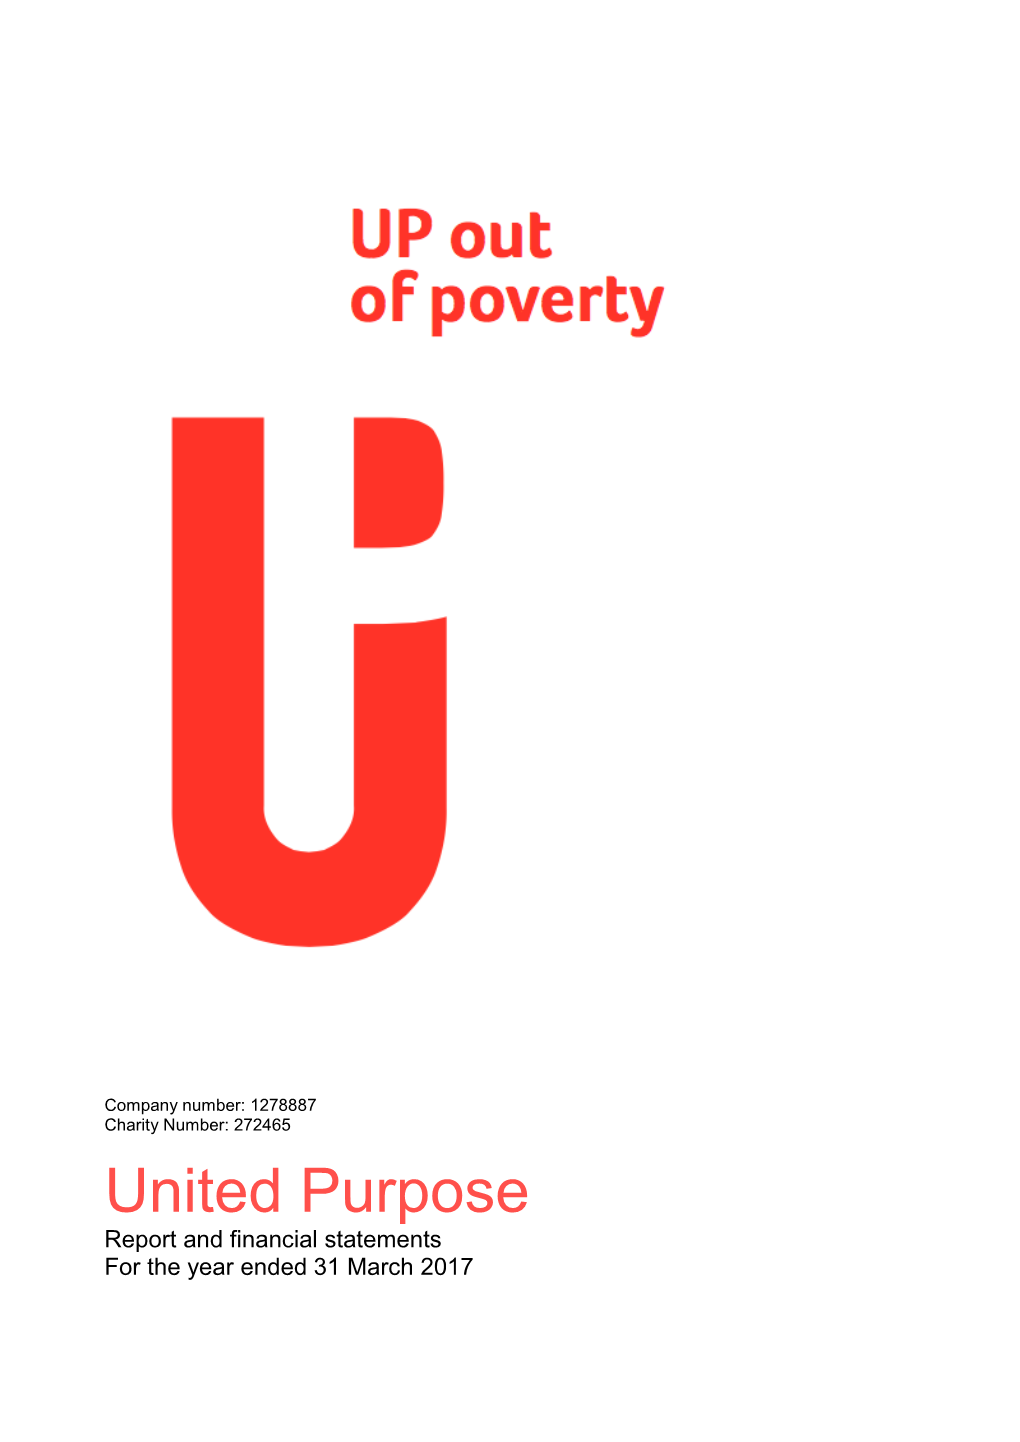 United Purpose Report and Financial Statements for the Year Ended 31 March 2017